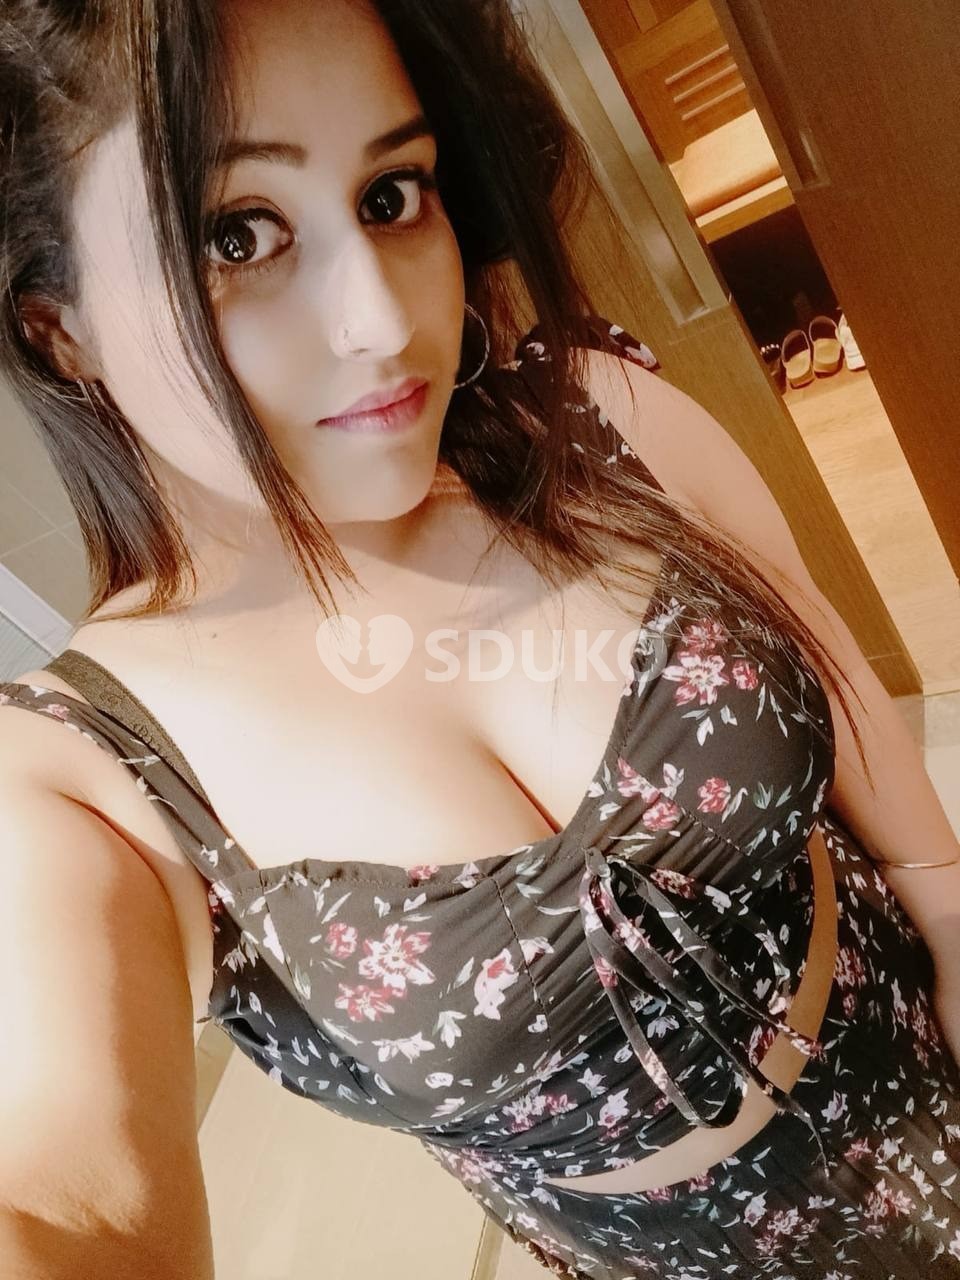 SURAT ⭐ HOME AND HOTEL SERVICE AVAILABLE FULL SAFE AND SECURE SERVICE AVAILABLE KAVYA